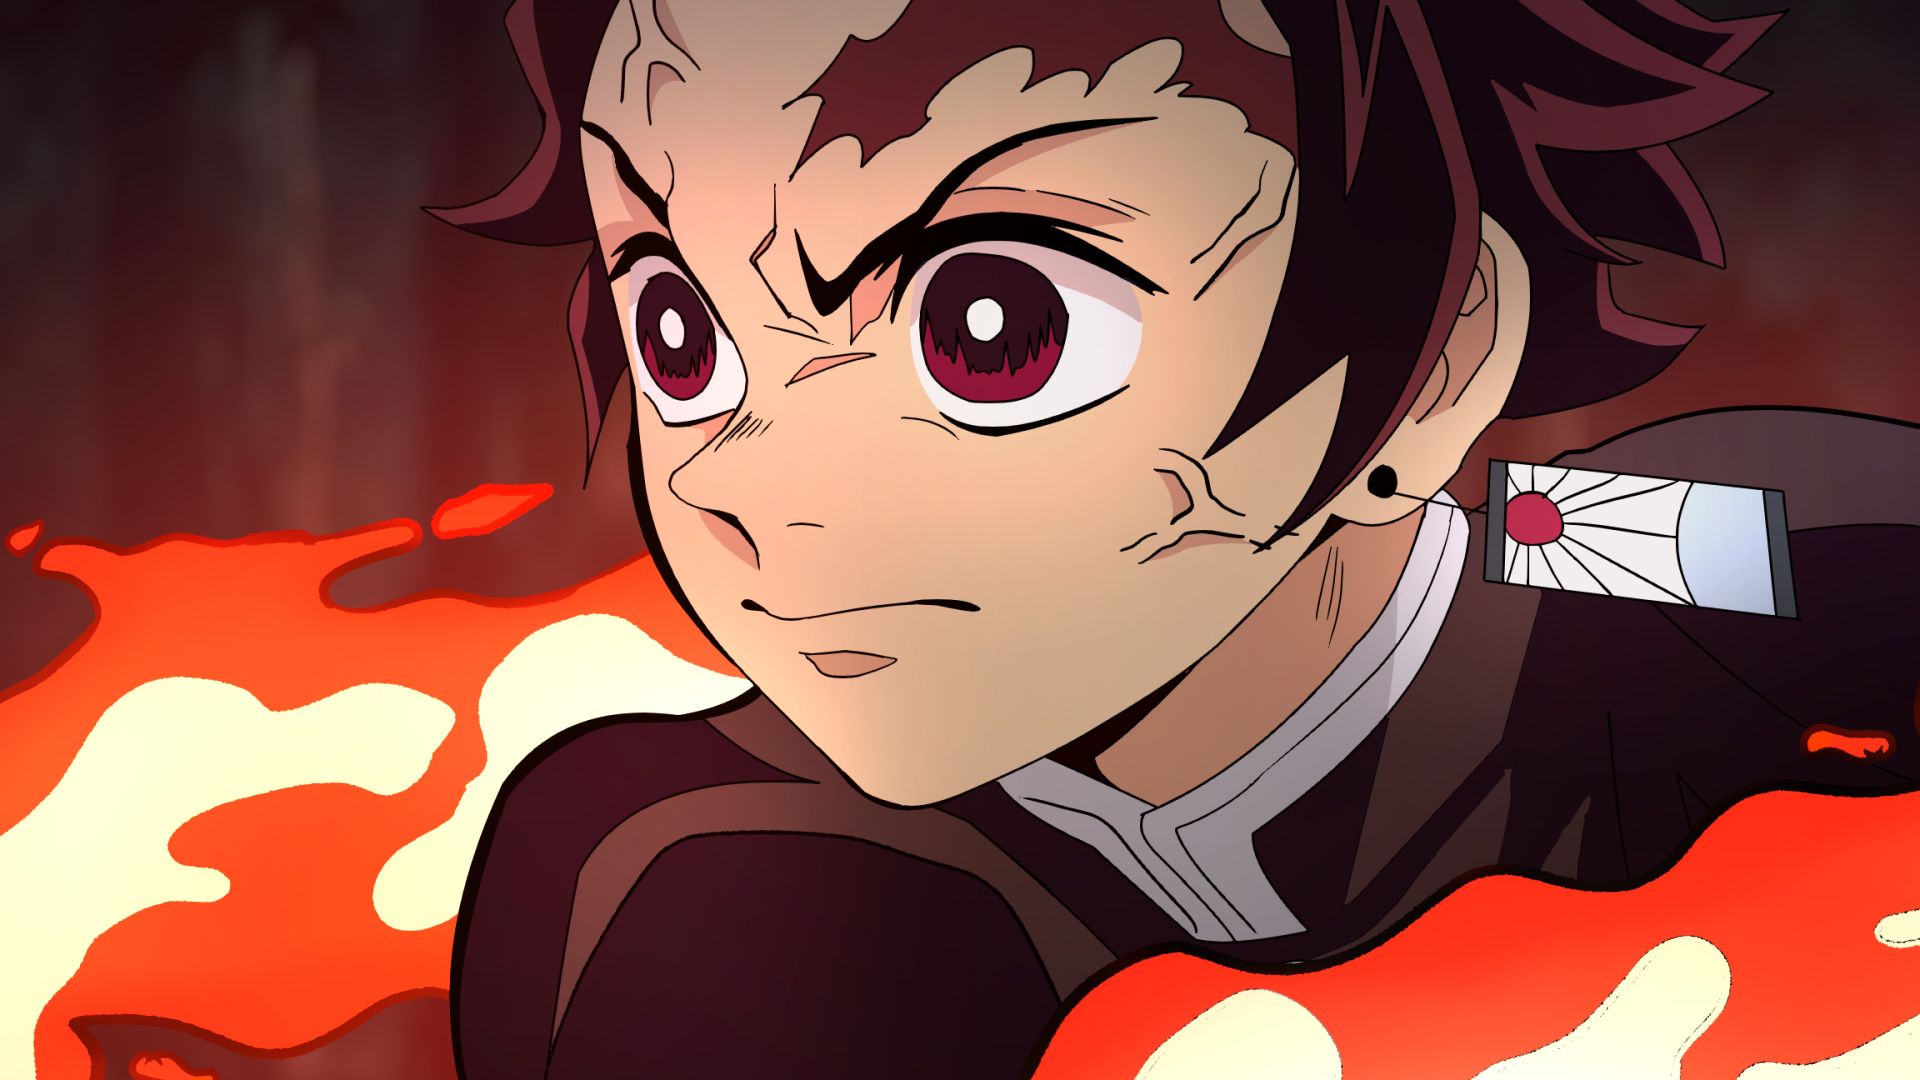 A close-up of a young man with short hair and a black shirt, with a red and orange flame behind him. He has a determined look on his face. - Tanjiro Kamado